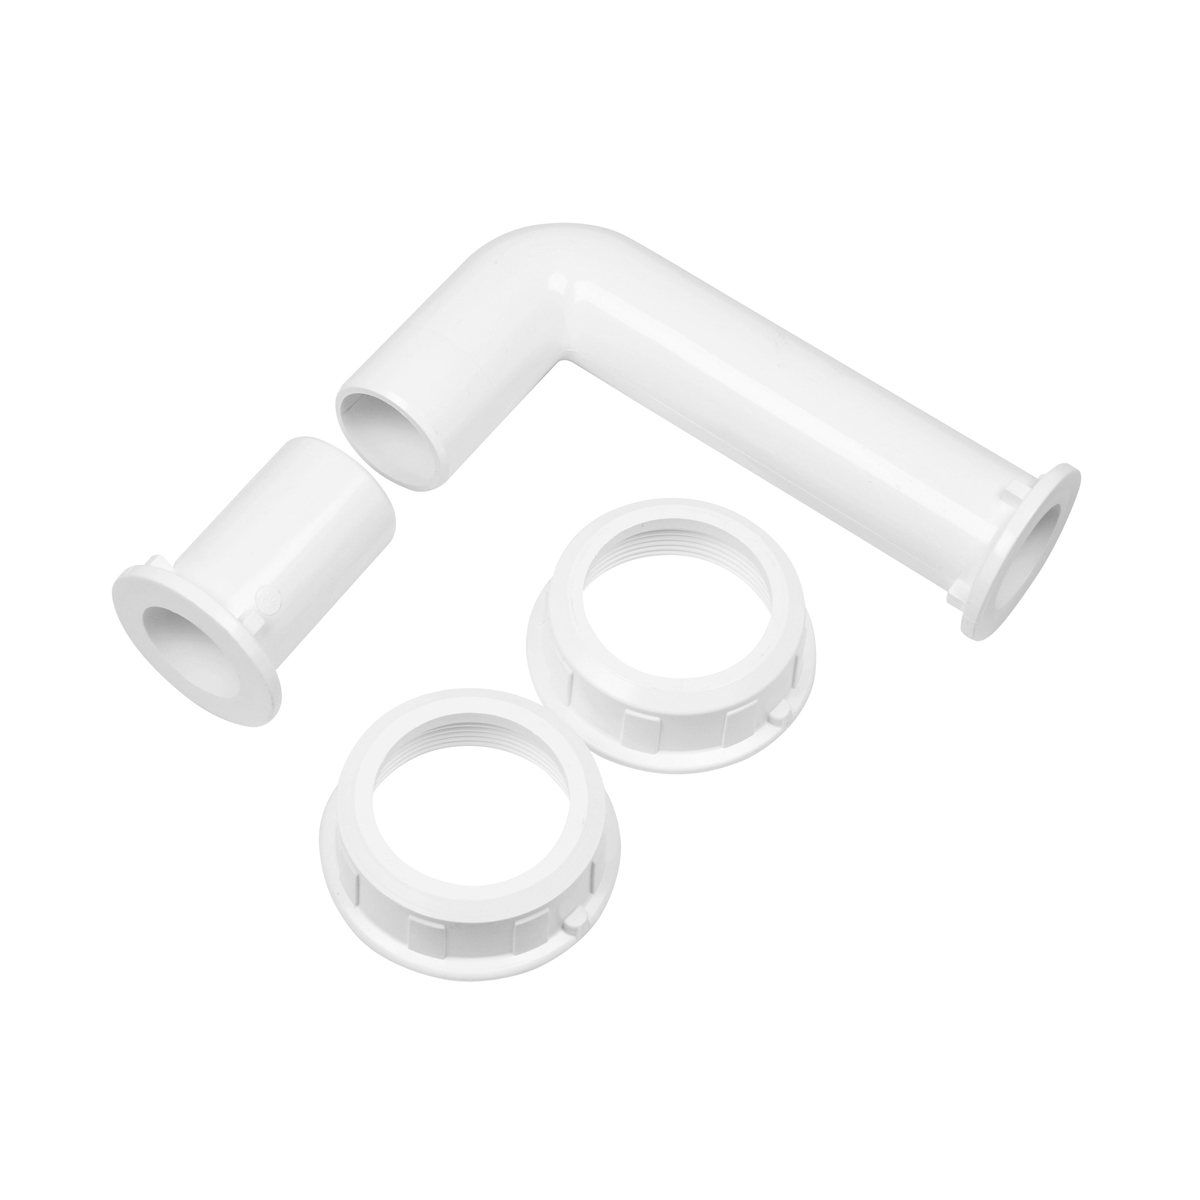 Pipe-system for back wash valve with union-nut 1 1/2" PVC white d50 loose packed Pipe-system for back wash valve with union-nut 1 1/2" PVC white d50 loose packed